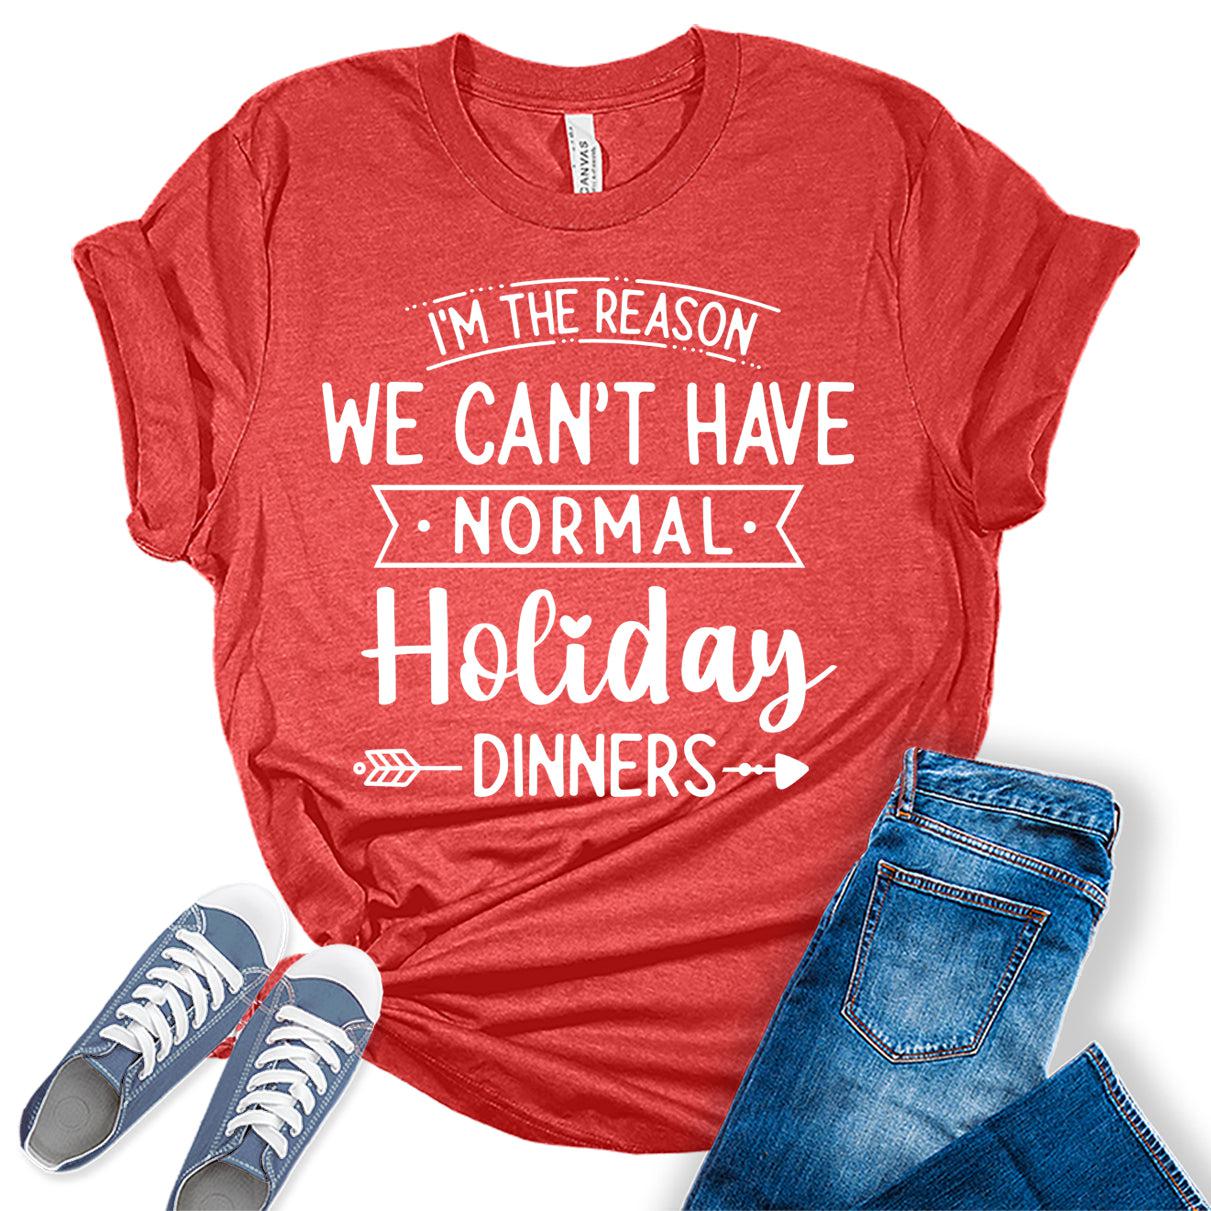 Holiday Dinners Shirts For Women's Graphic Tee